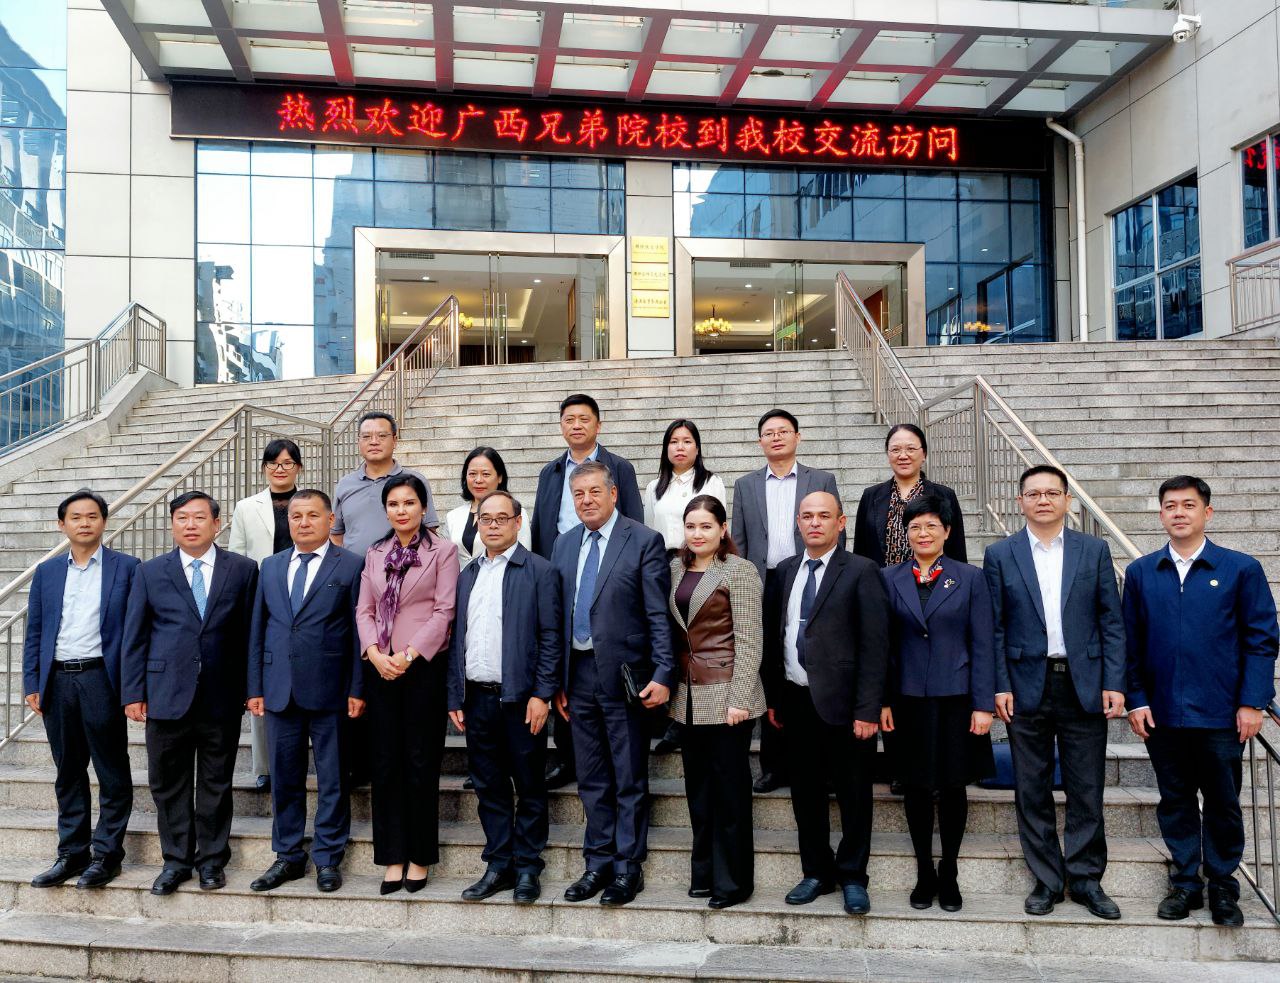 AFTER THE FORUM IN NANNING, A MEETING WAS HELD WITH RECTORS OF HIGHER EDUCATION INSTITUTIONS IN GUANGXI REGION